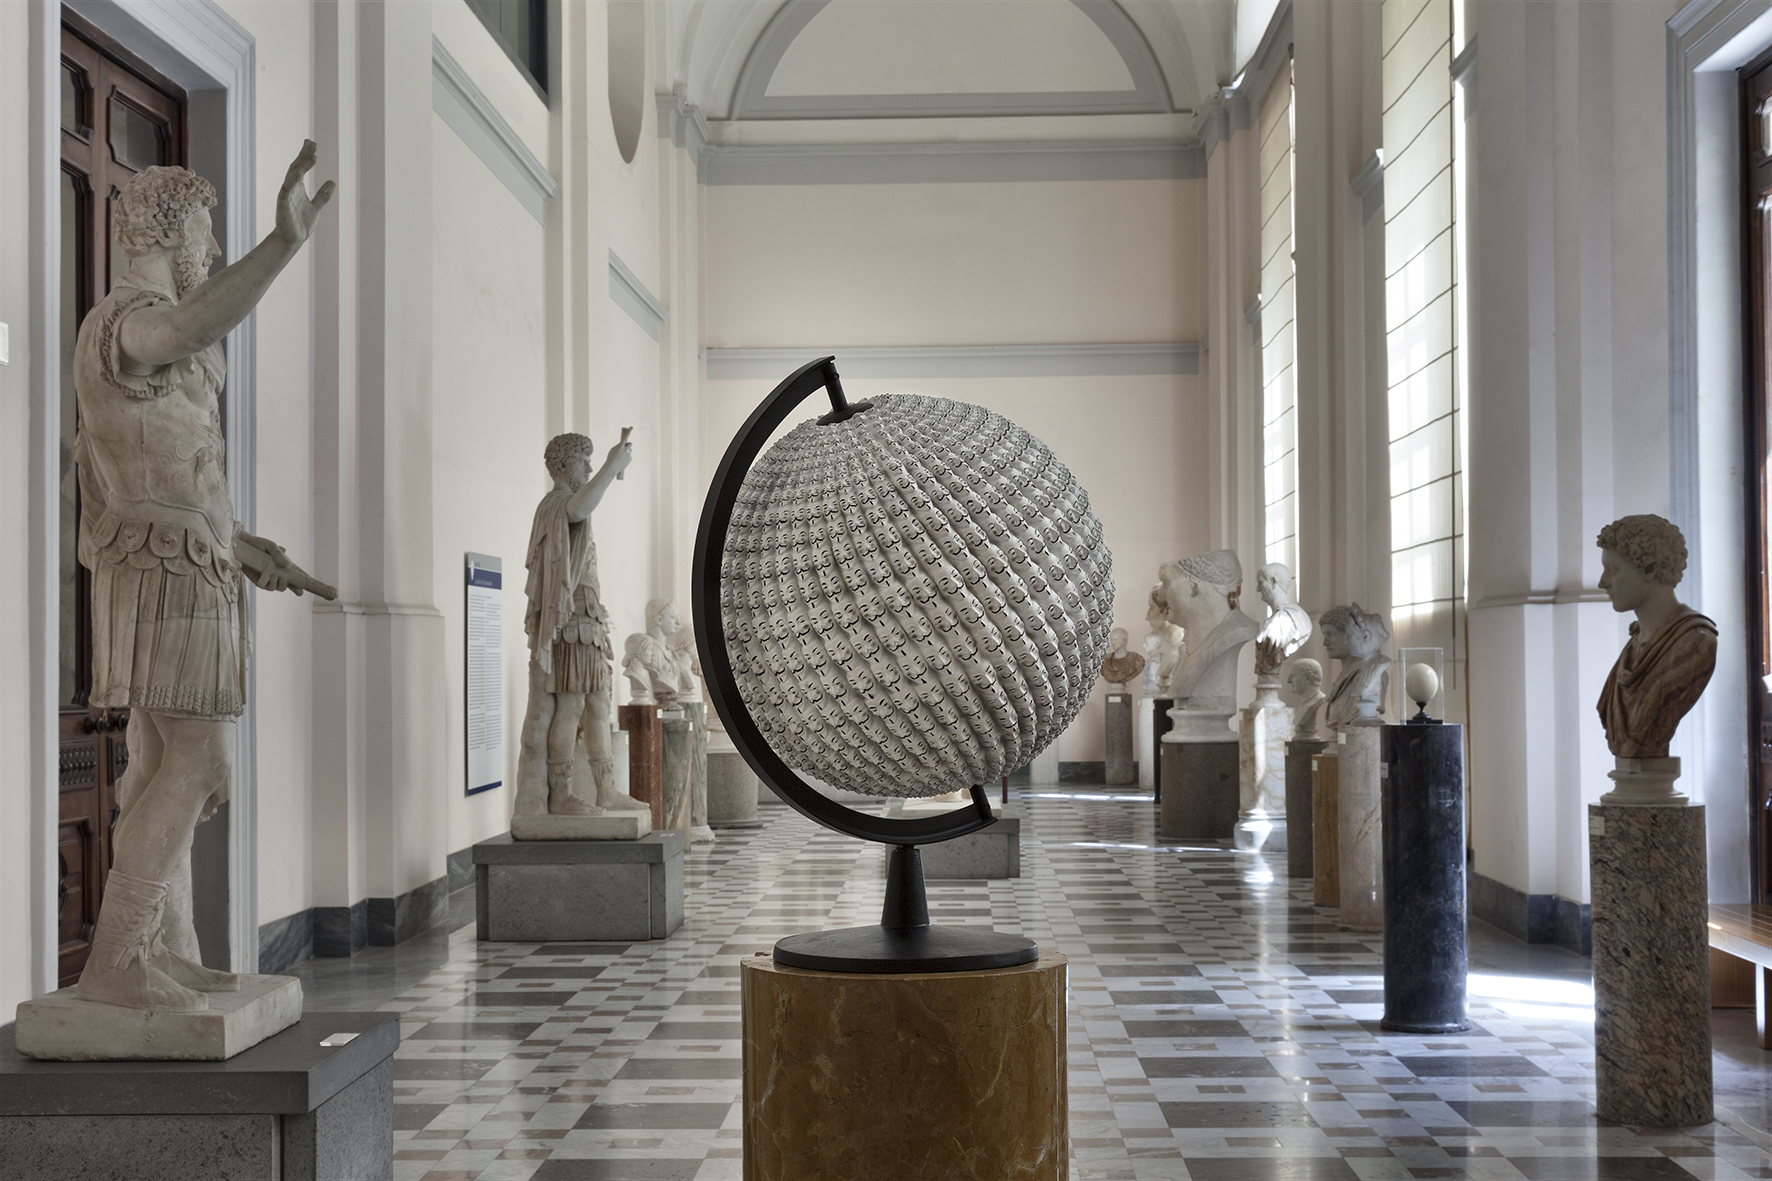    After the West , 2016 . MANN – Museo Archeologico Nazionale di Napoli, Naples 2016. Installation view. Photo: Claudio Abate 